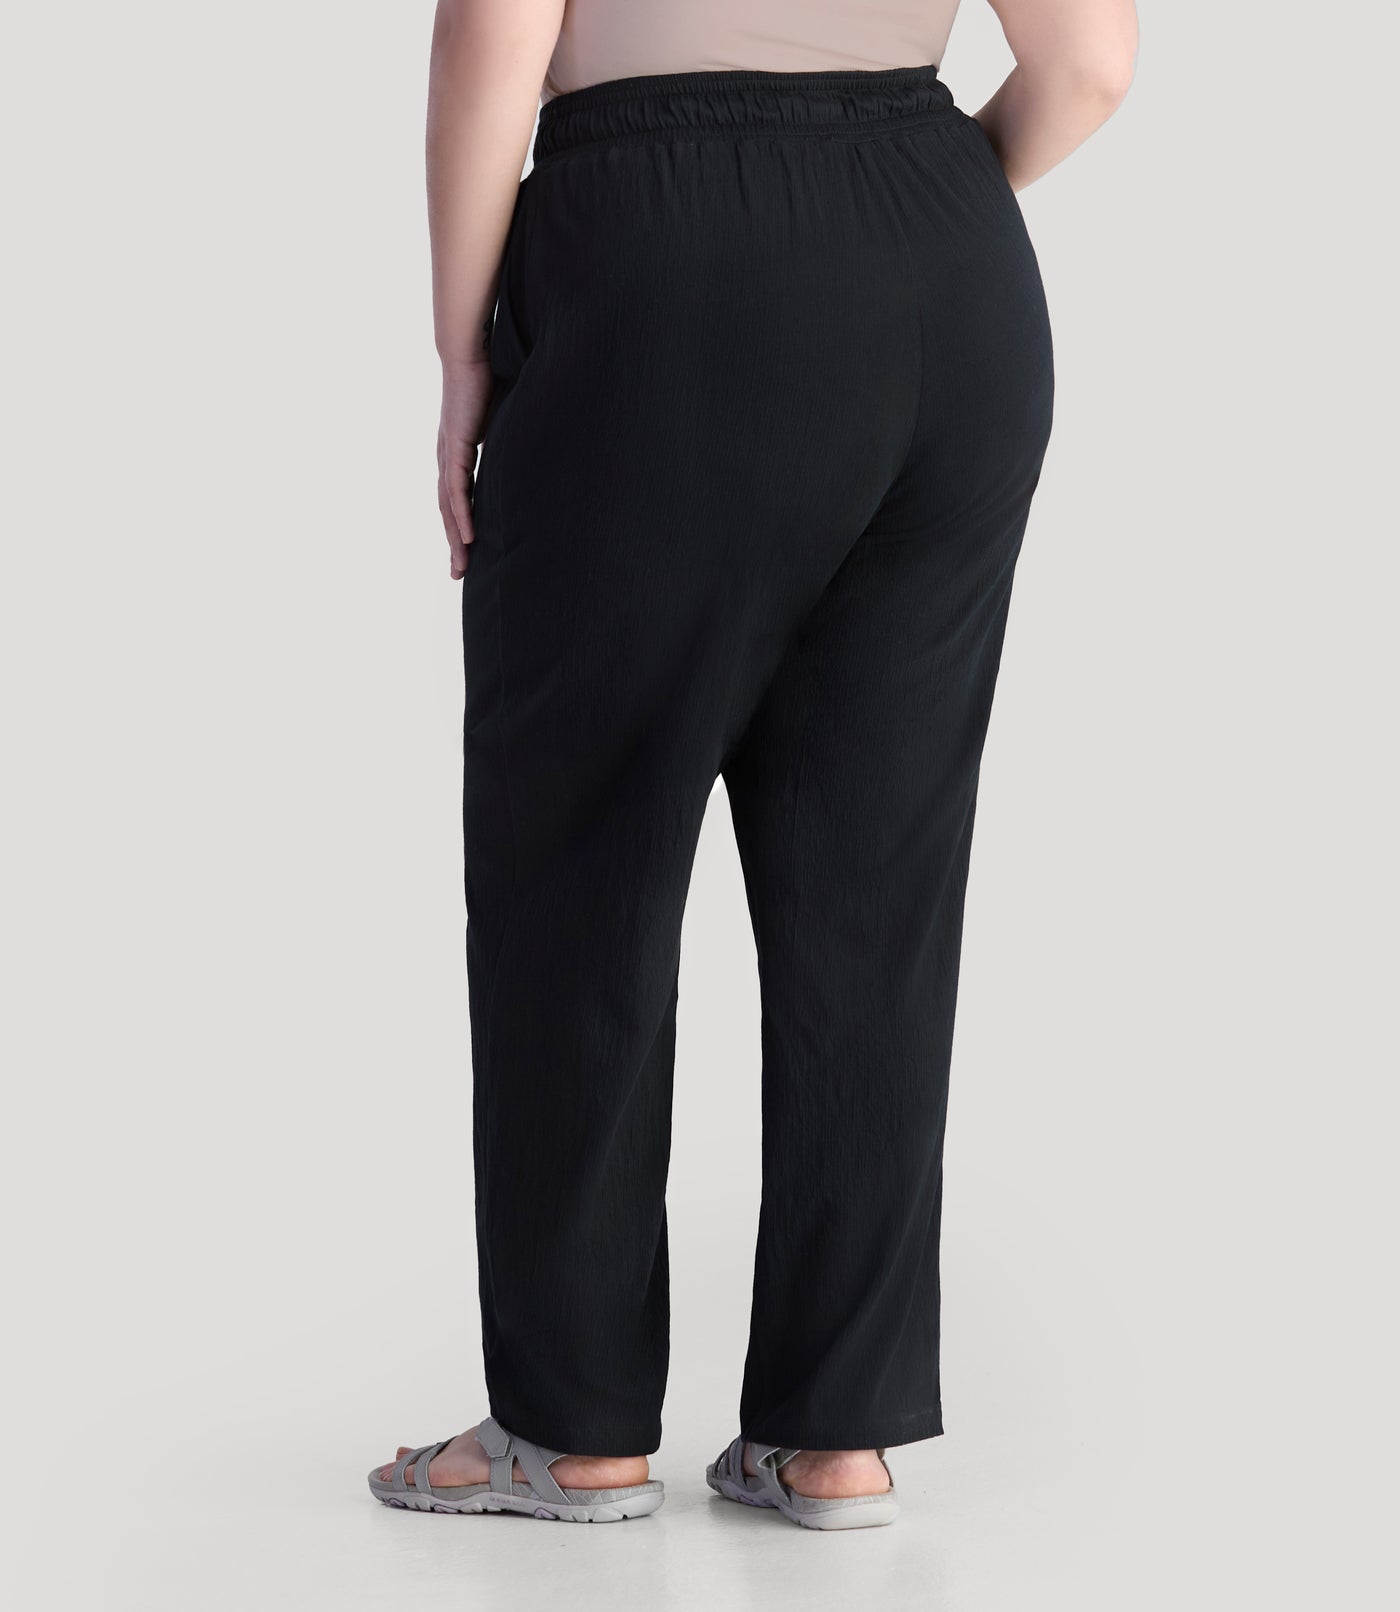 Plus size model, facing back wearing JunoActive's EZ Style Cotton Pocketed plus size Pant in color black.